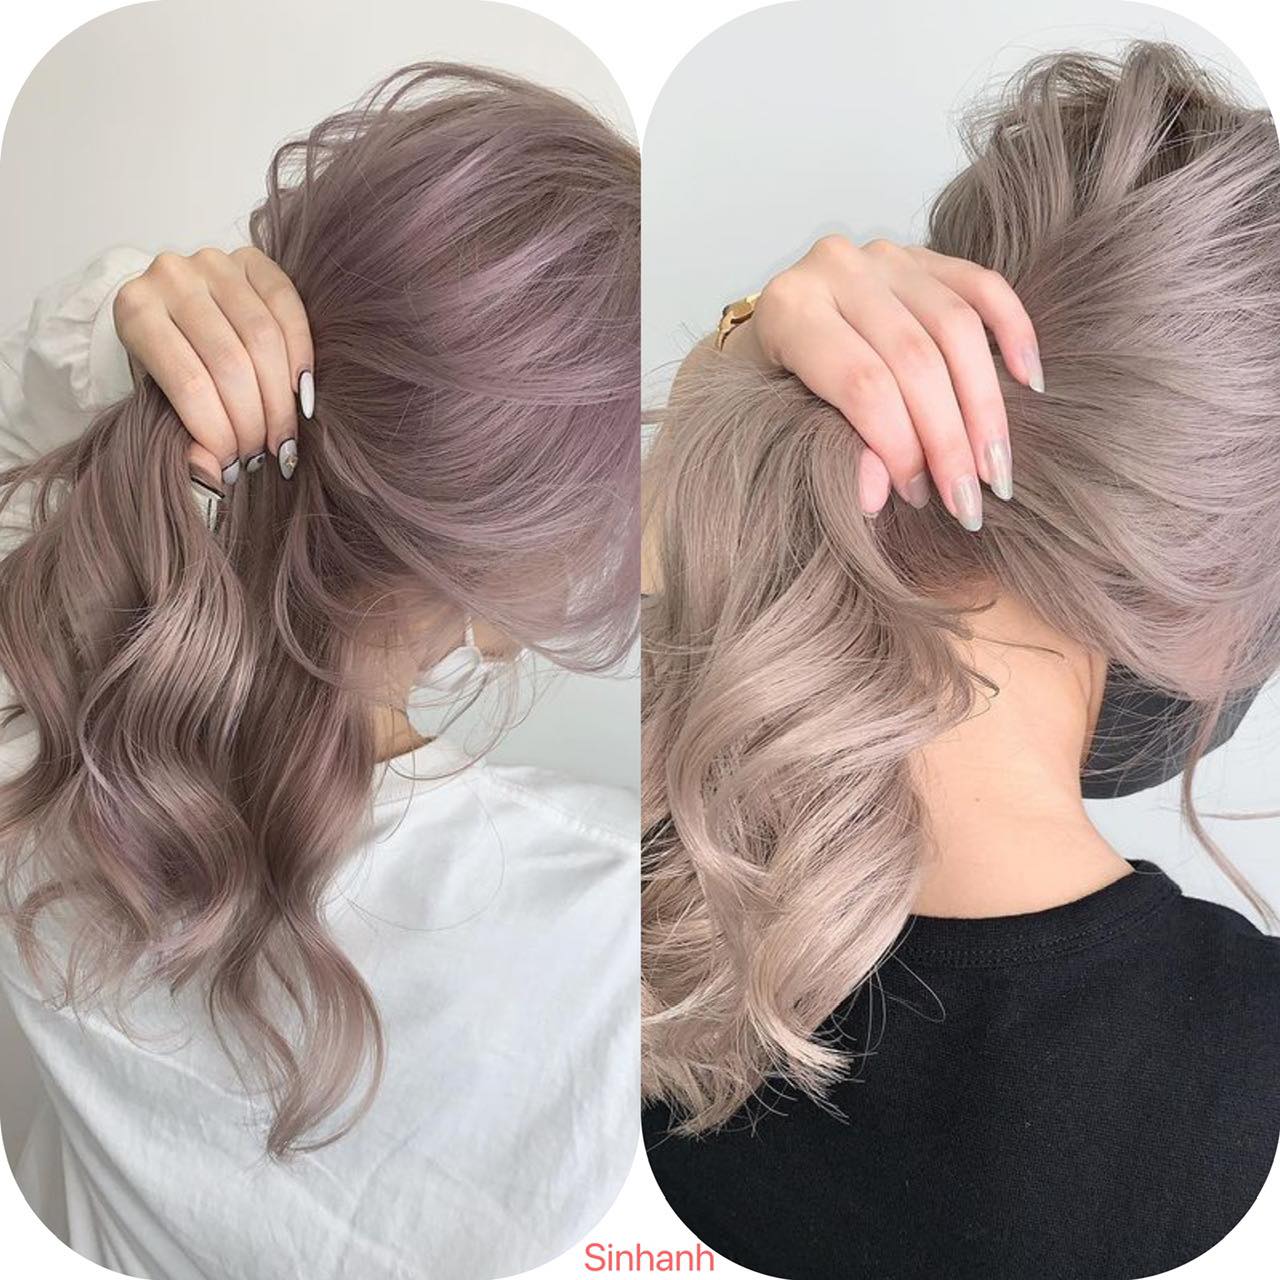 Sinh Anh hairstylist ảnh 3